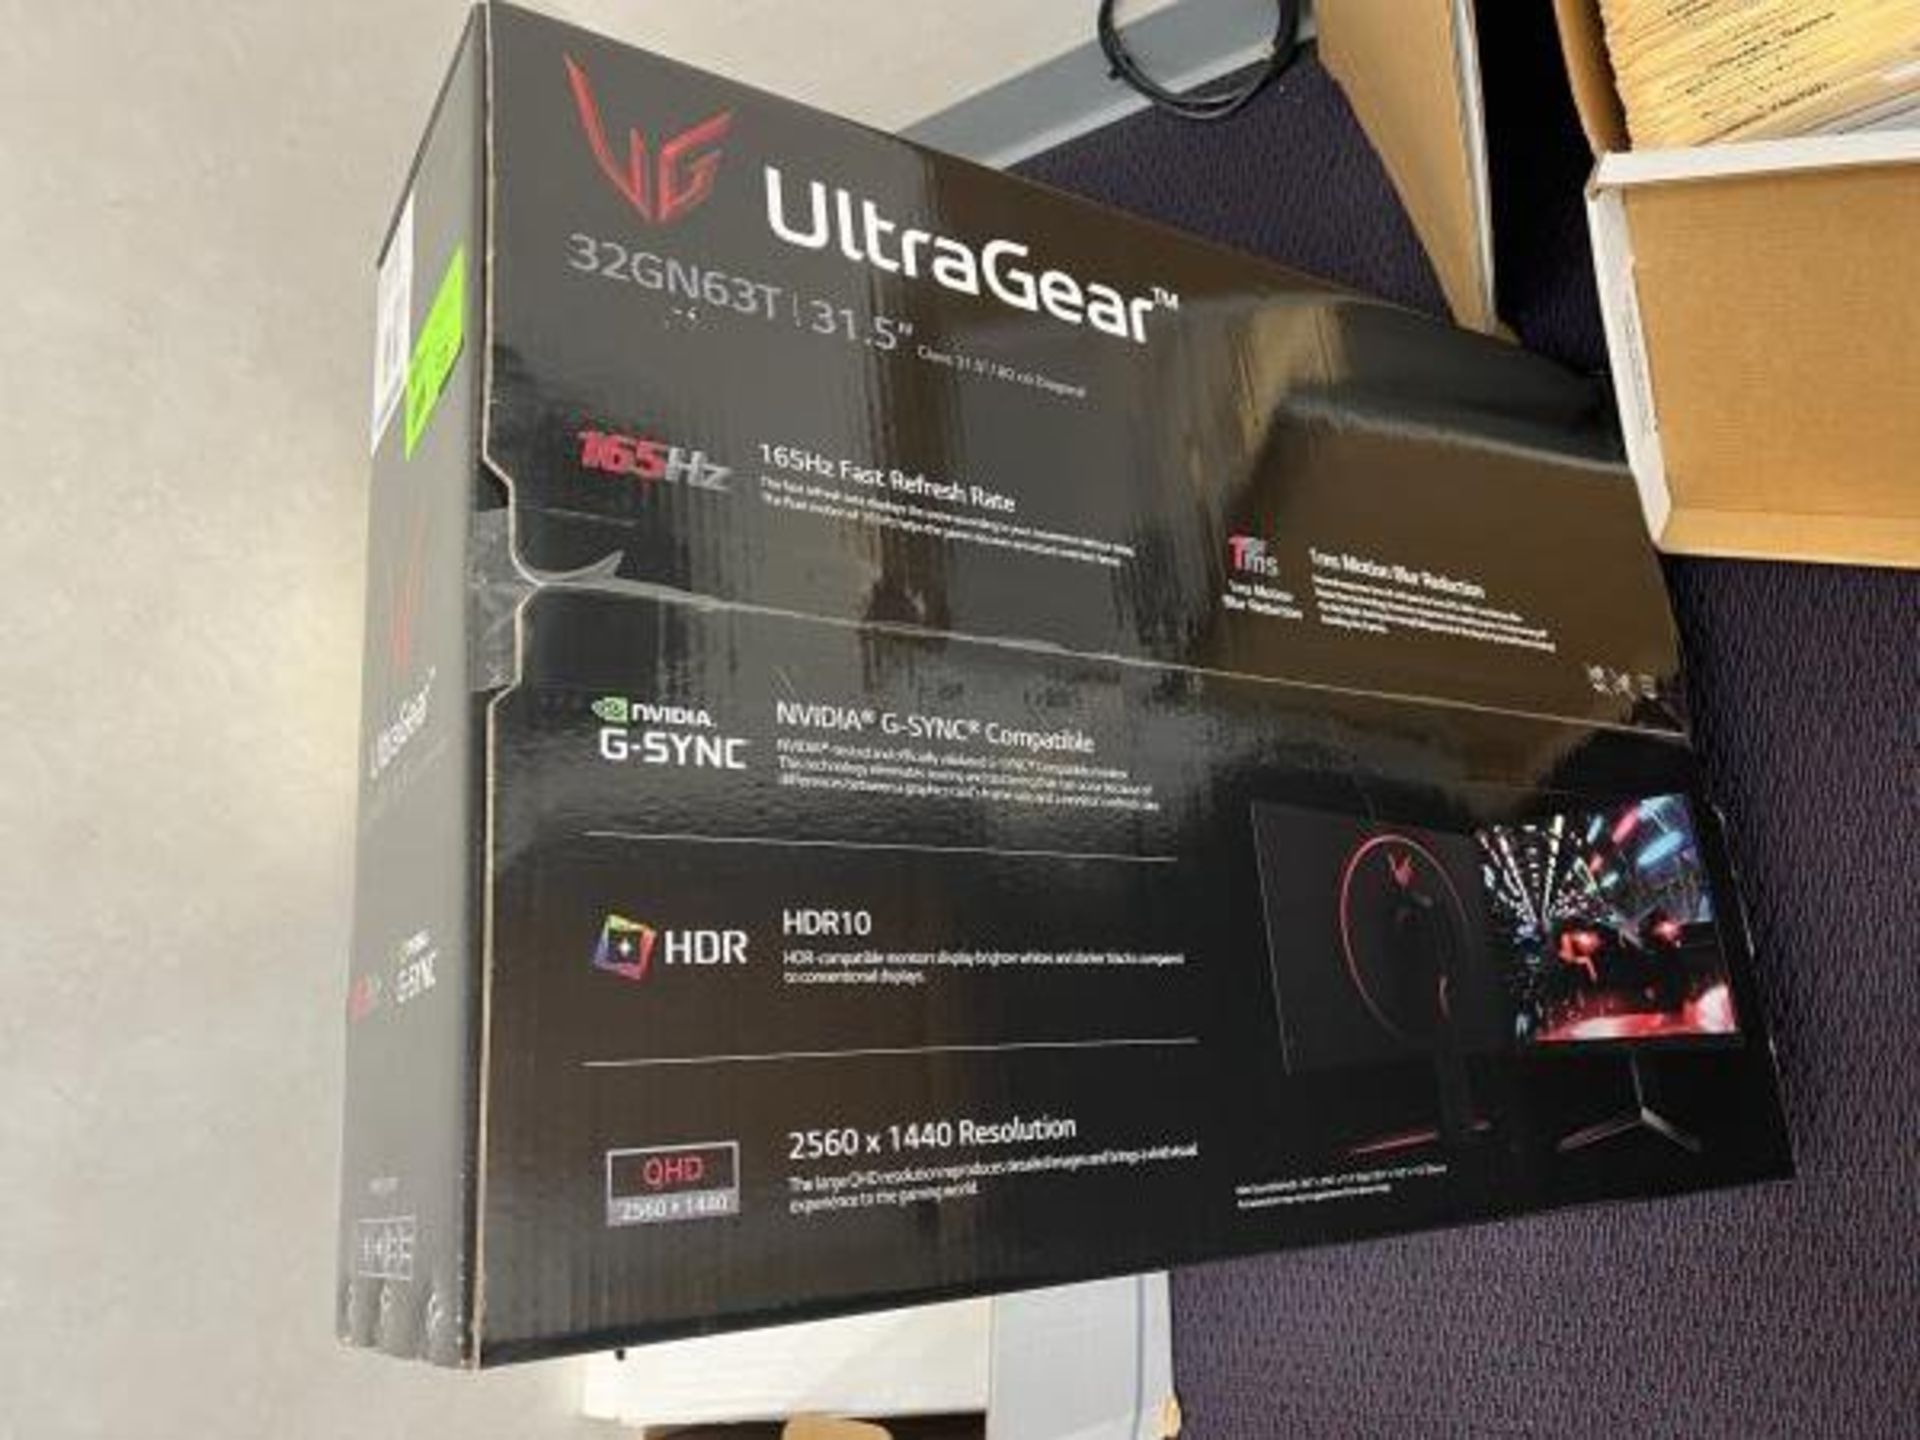 Ultra Geer 32GN63T 31.5" Monitor, In Original Box